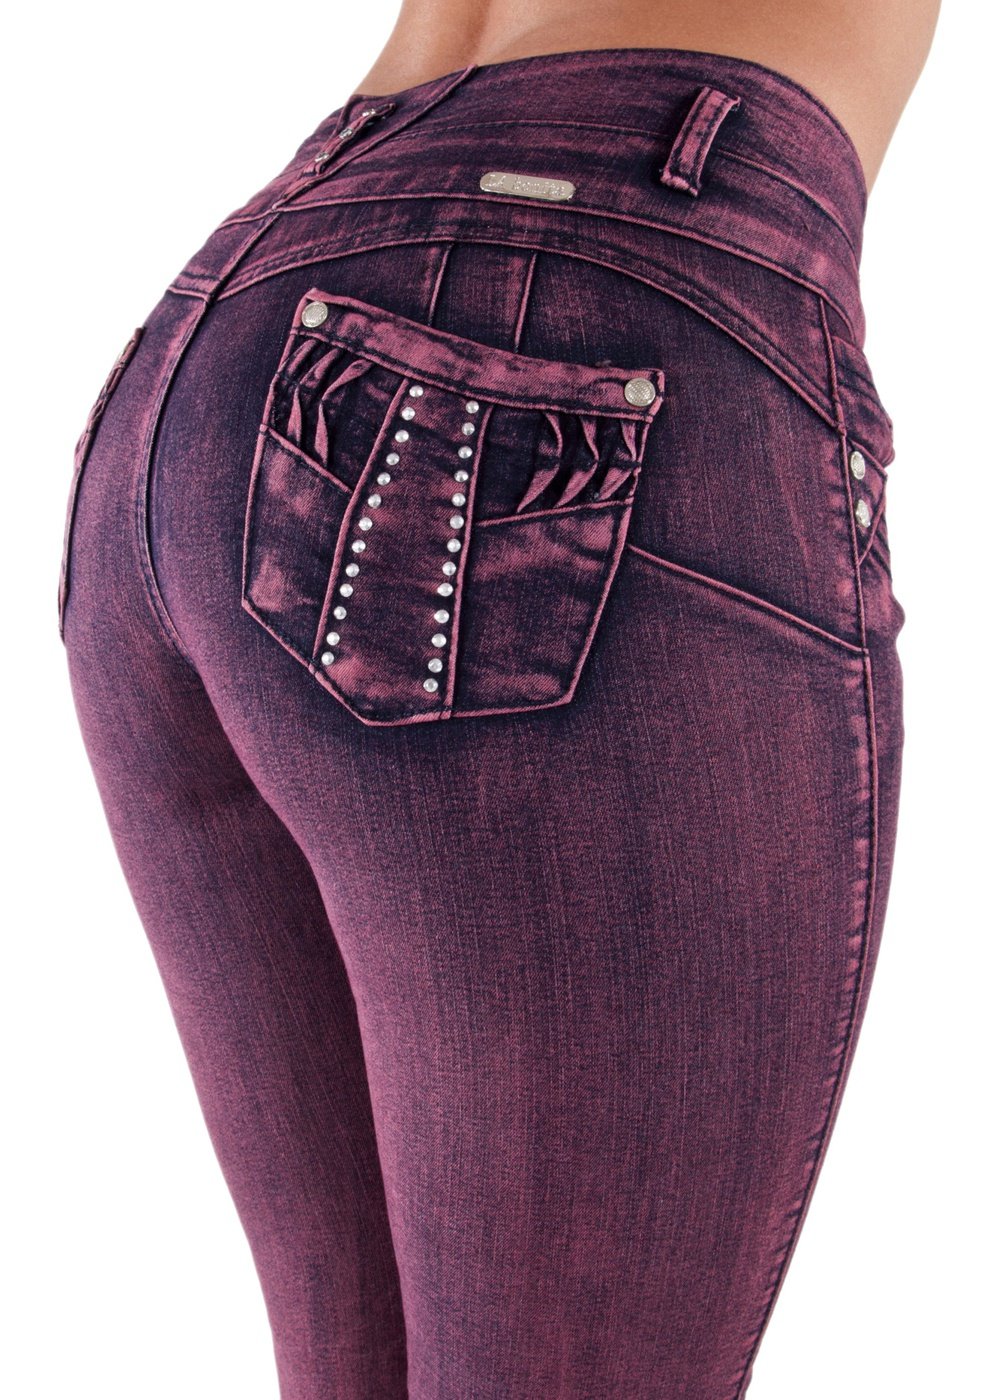 Jeans Colombianos Levantacola 20% off